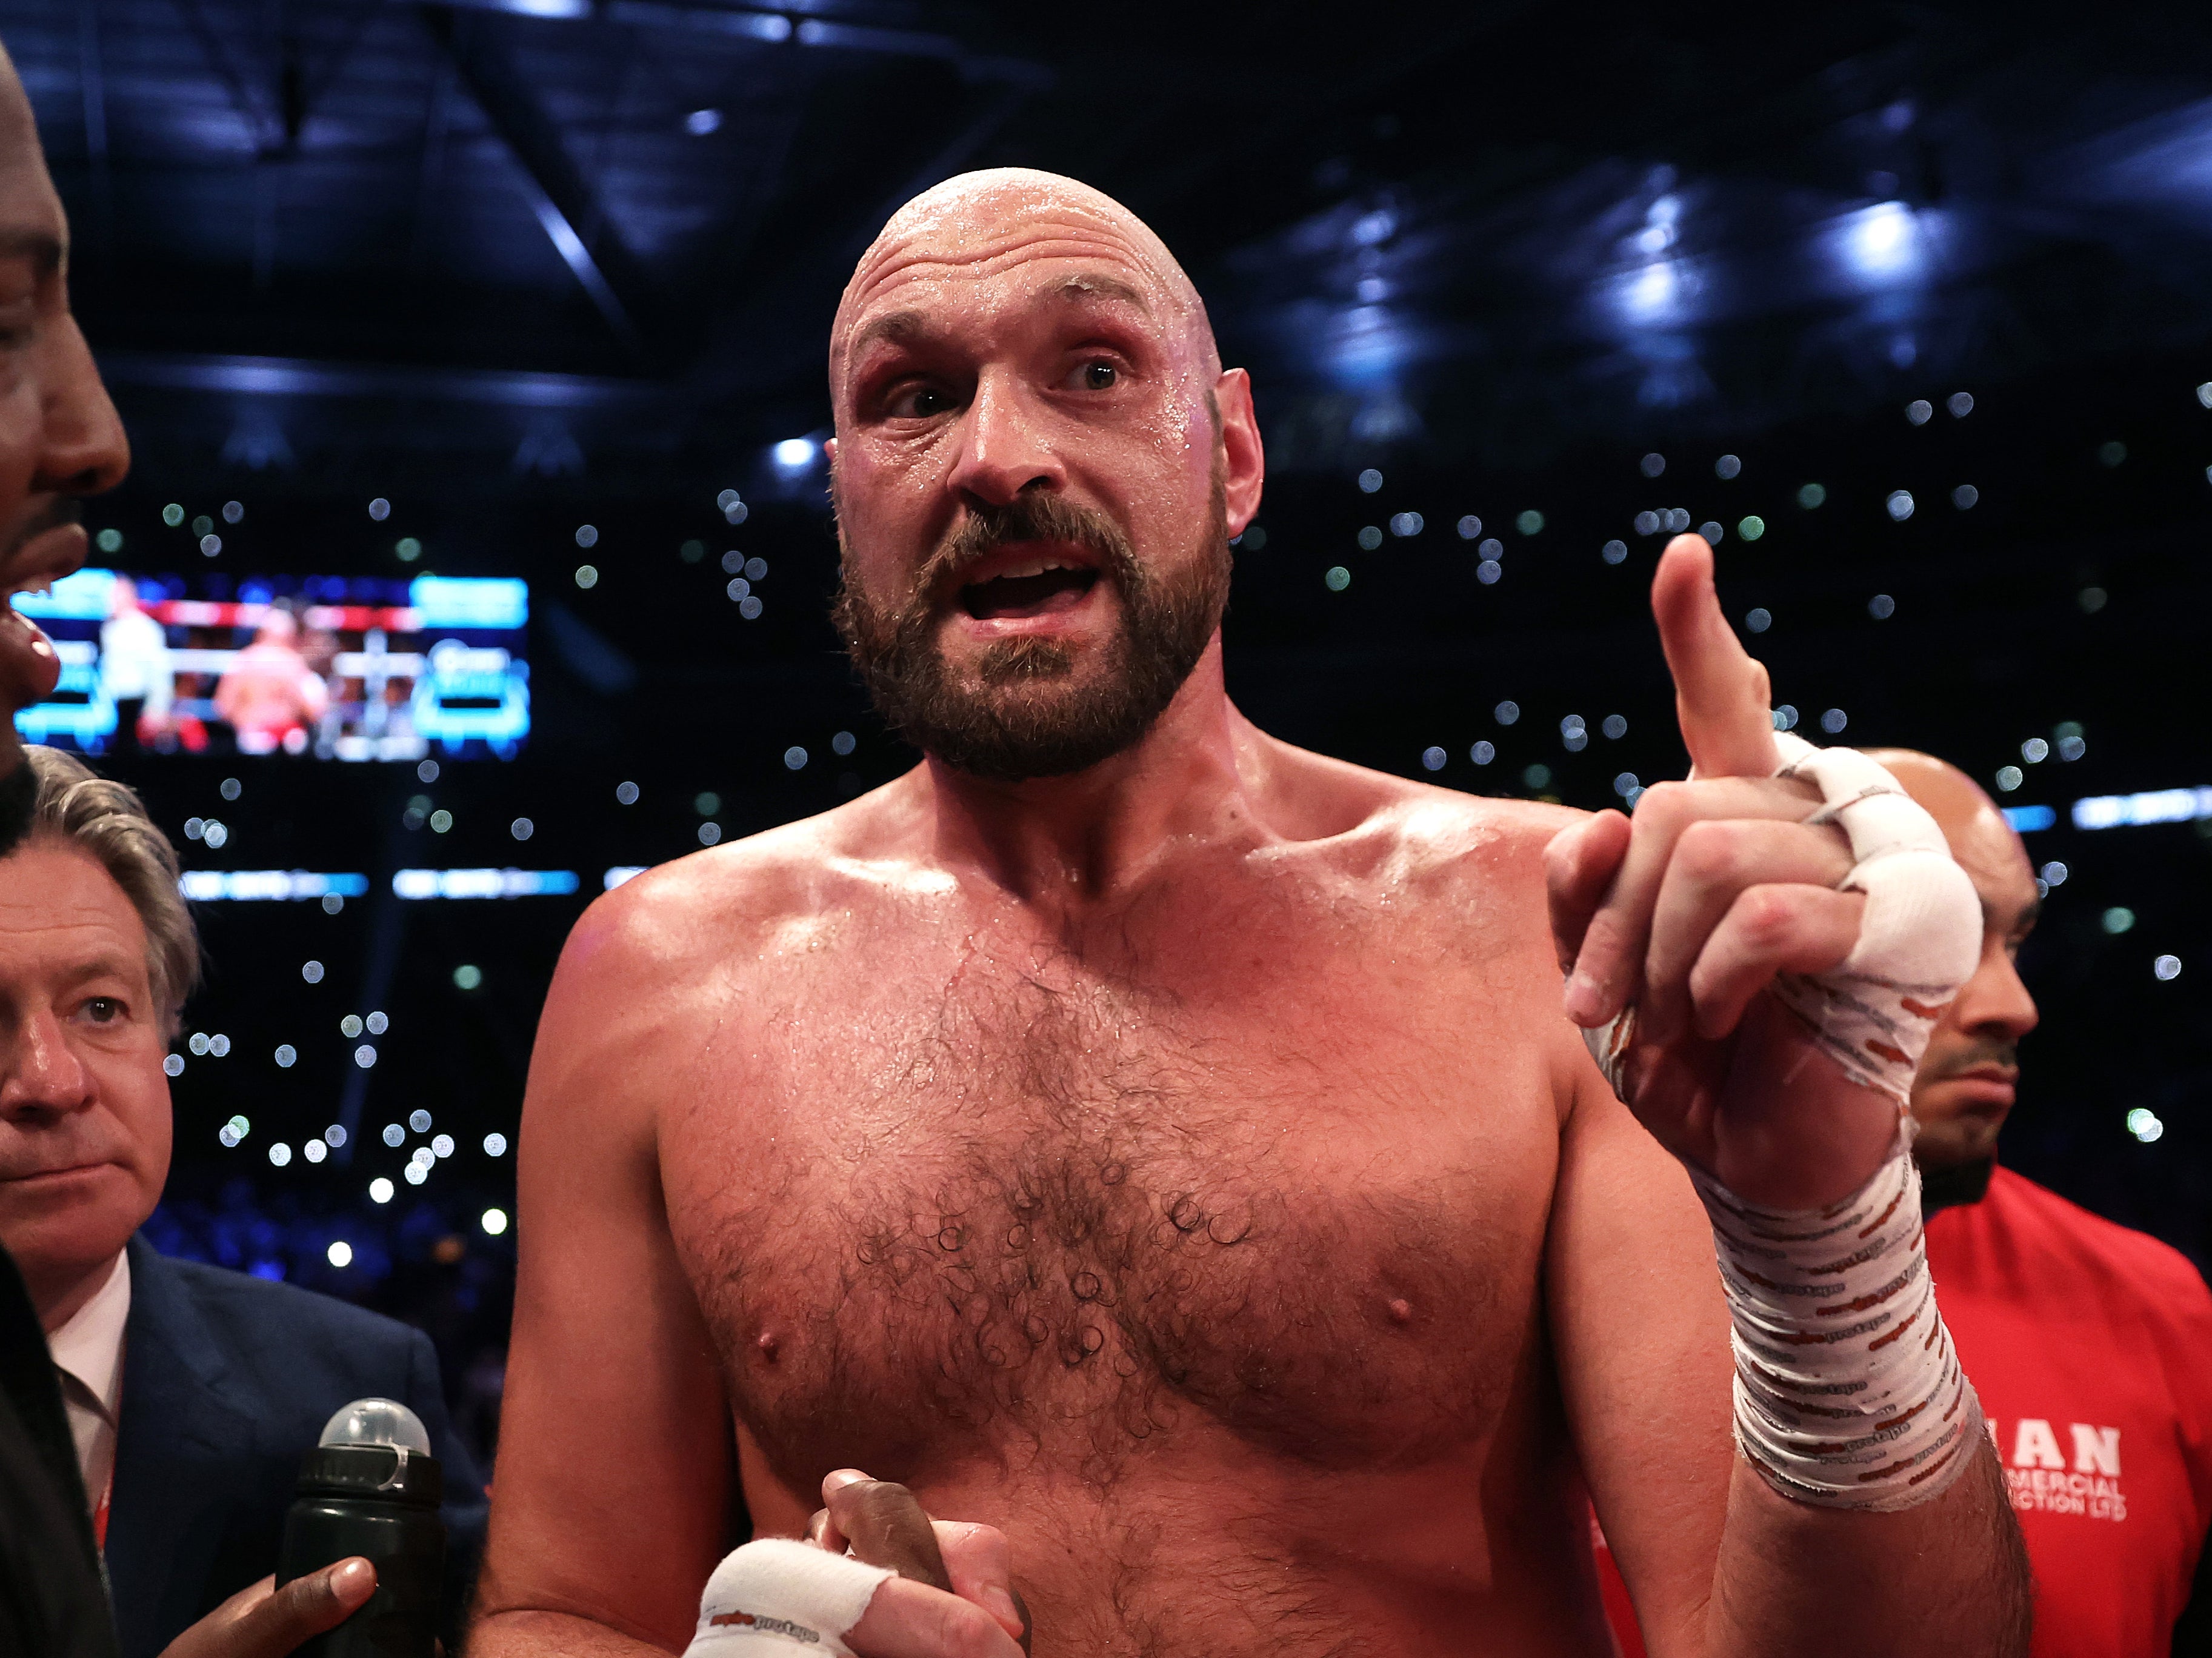 World heavyweight champion Tyson Fury will fight again when the price is right